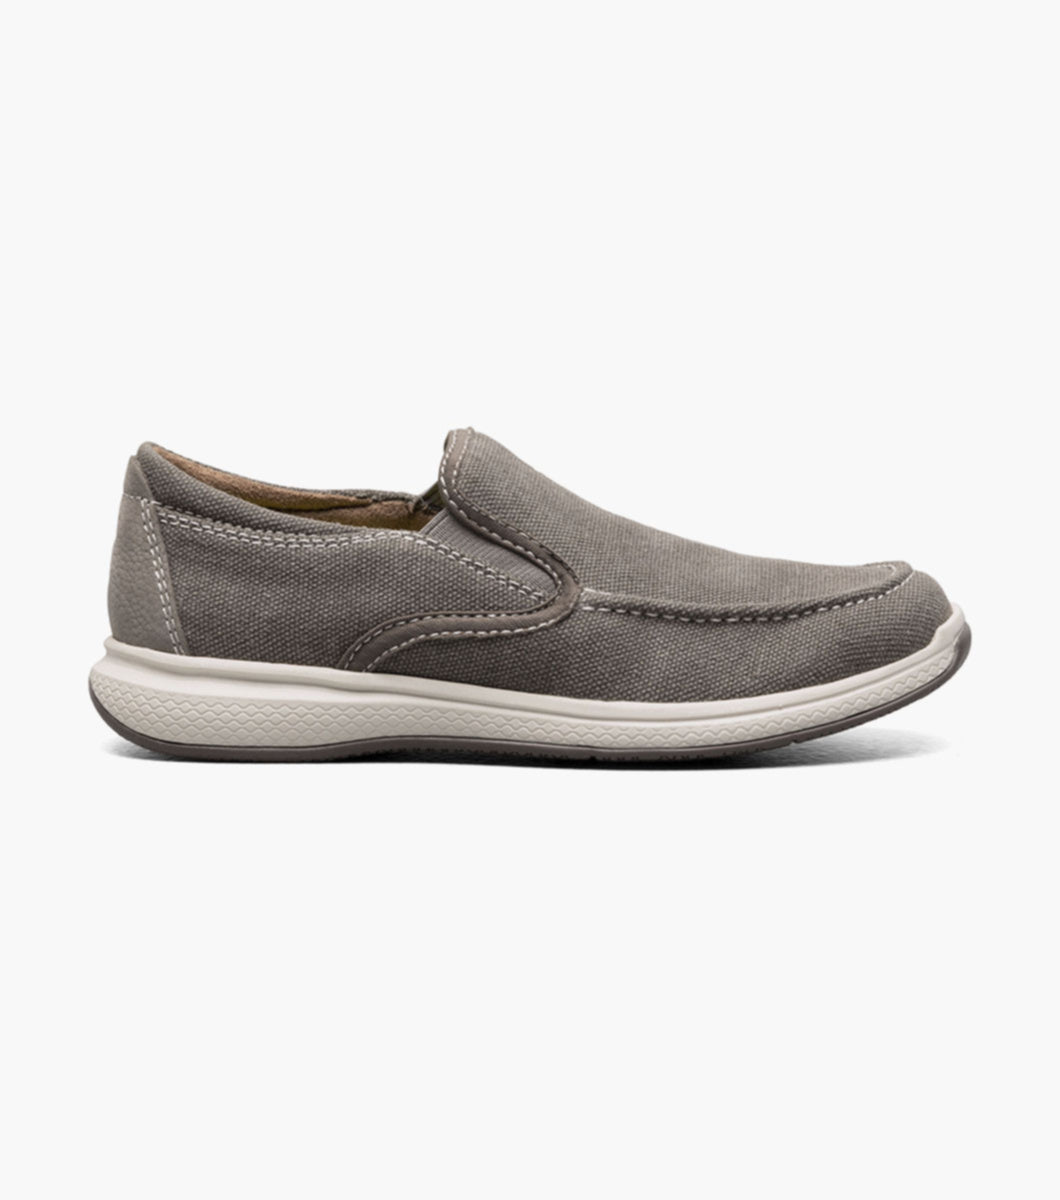 The easy-on, easy-off design and cool canvas upper of the Florsheim Venture Canvas Moc Toe Venetian Loafer, Jr. make it the perfect warm weather shoe. The versatile design is complemented by the comfort of a fully cushioned footbed and our ultra-comfortable Supacush midsole.